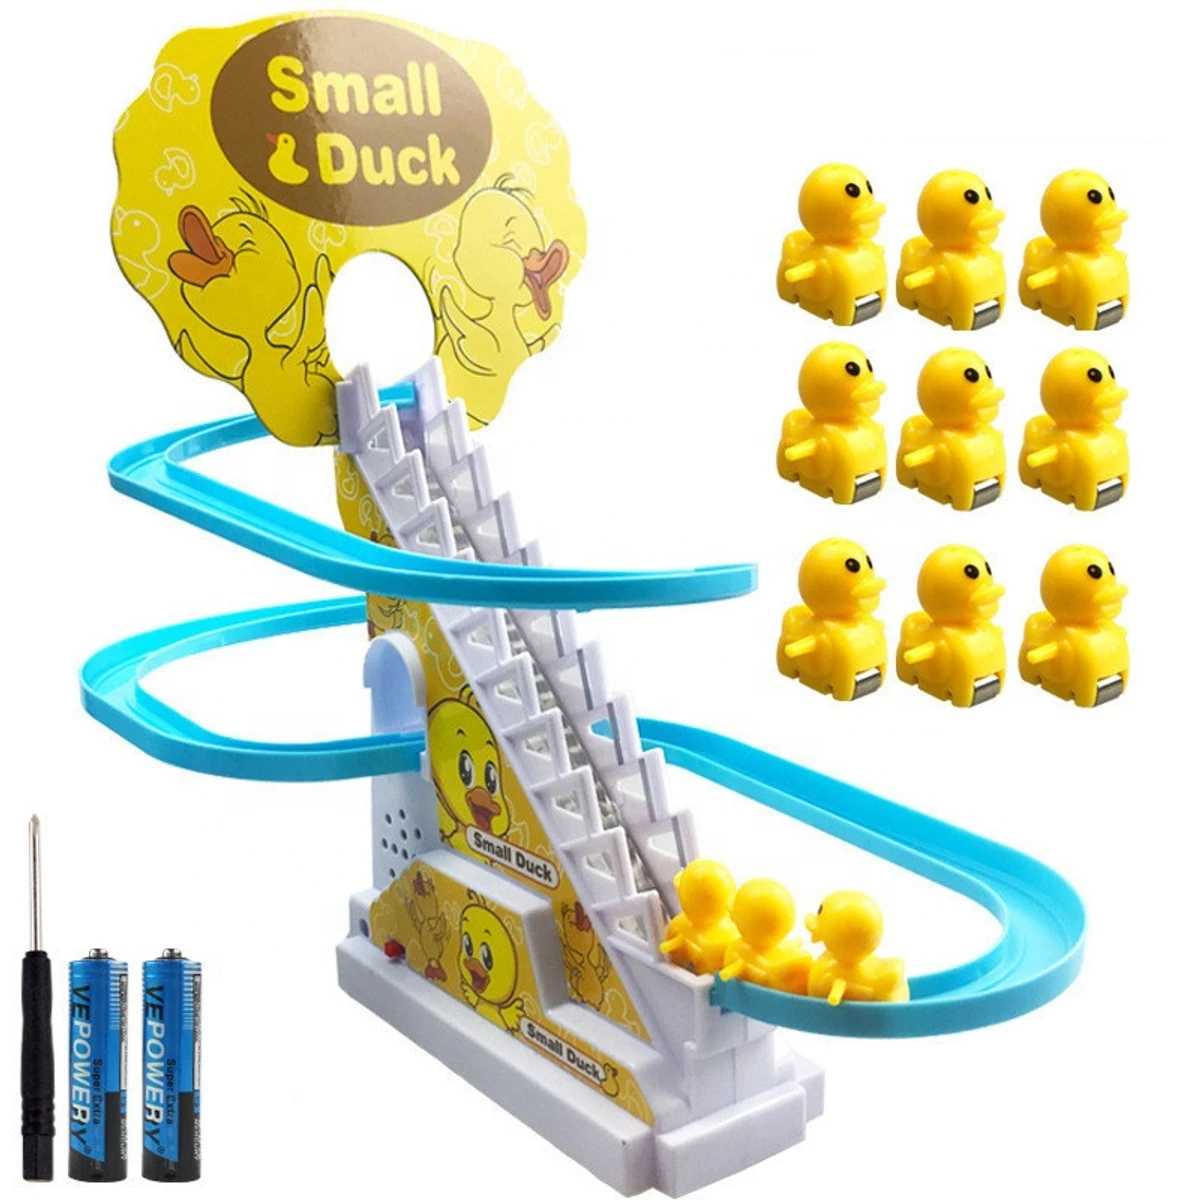 Duck Slide Toy Set, Funny Automatic Stair-Climbing Ducklings Cartoon Race Track Set Little Lovely Penguins Slide Toy Escalator Toy with Lights and Music (Duck)